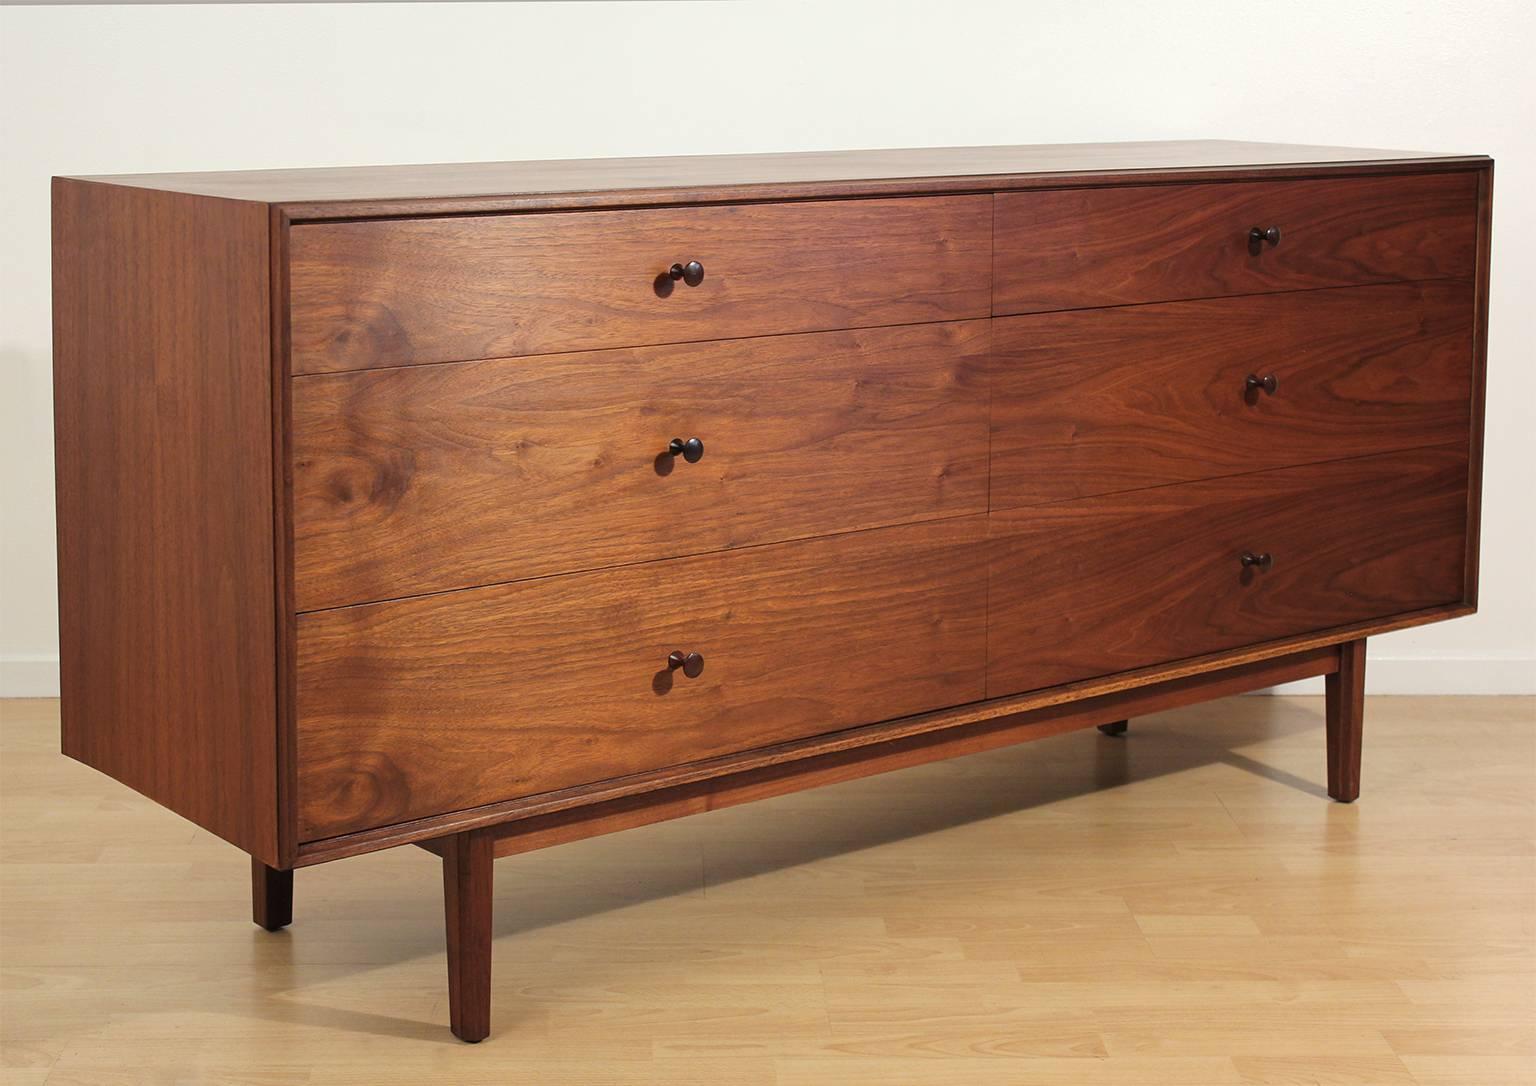 Beautiful Glenn of California six-drawer dresser designed by Milo Baughman, circa 1950s. Dresser is made of stunning walnut with rosewood pulls. In excellent vintage original condition.